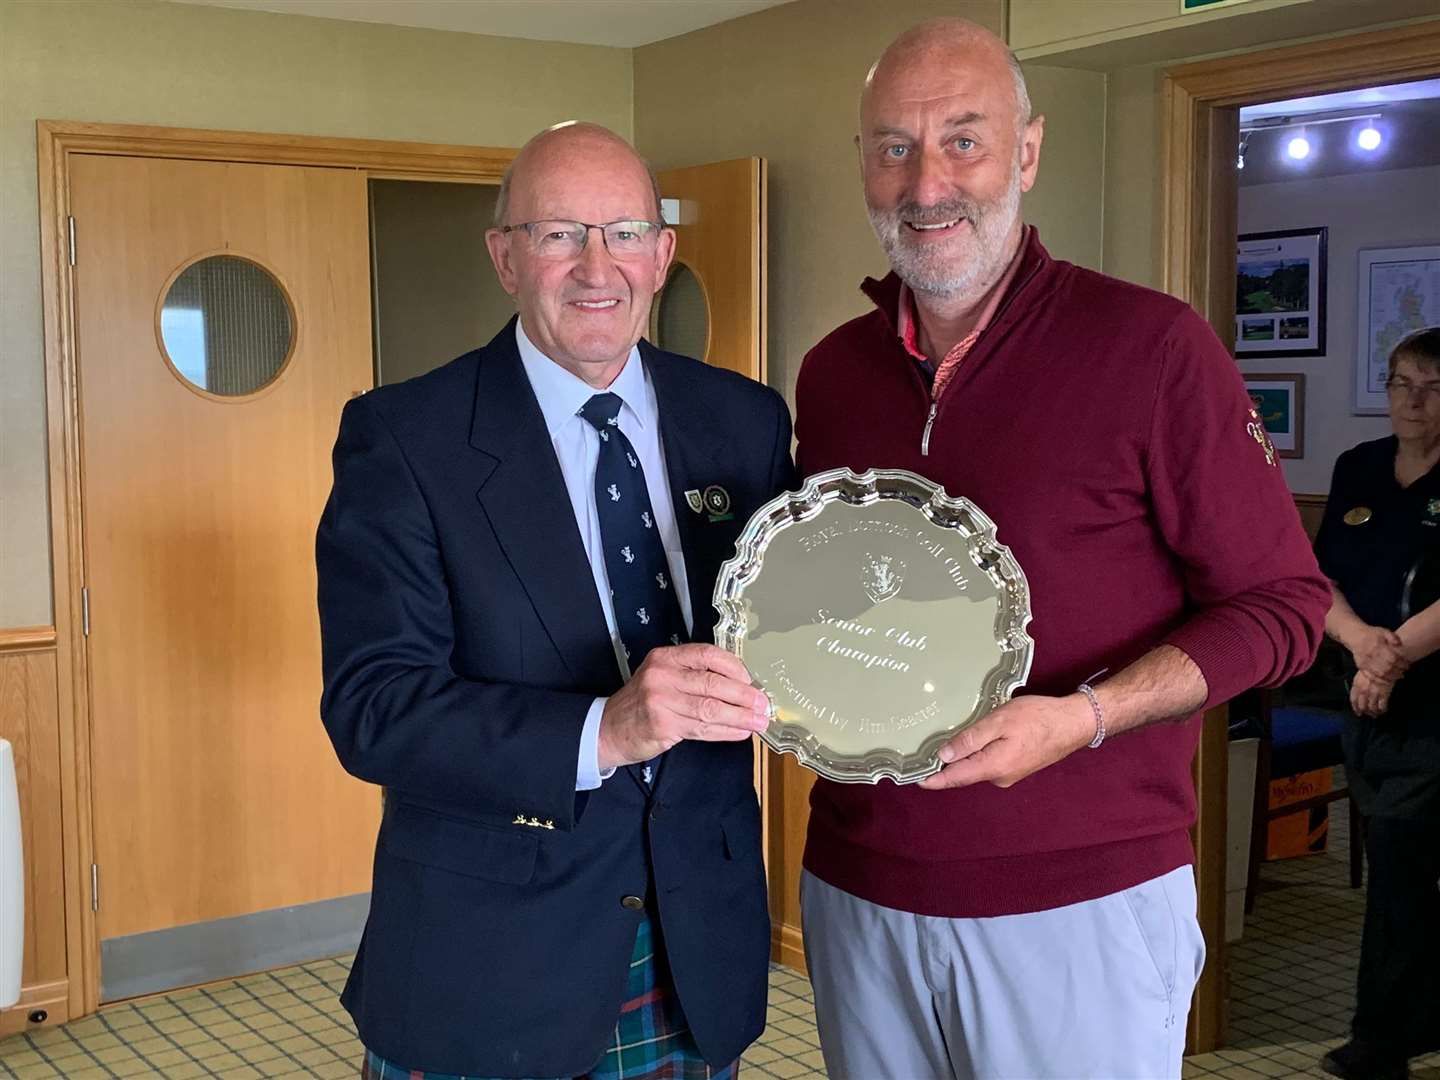 Gary Bethune led the way in the Seniors championship at Royal Dornoch and received the salver from men’s captain Willie MacKay.